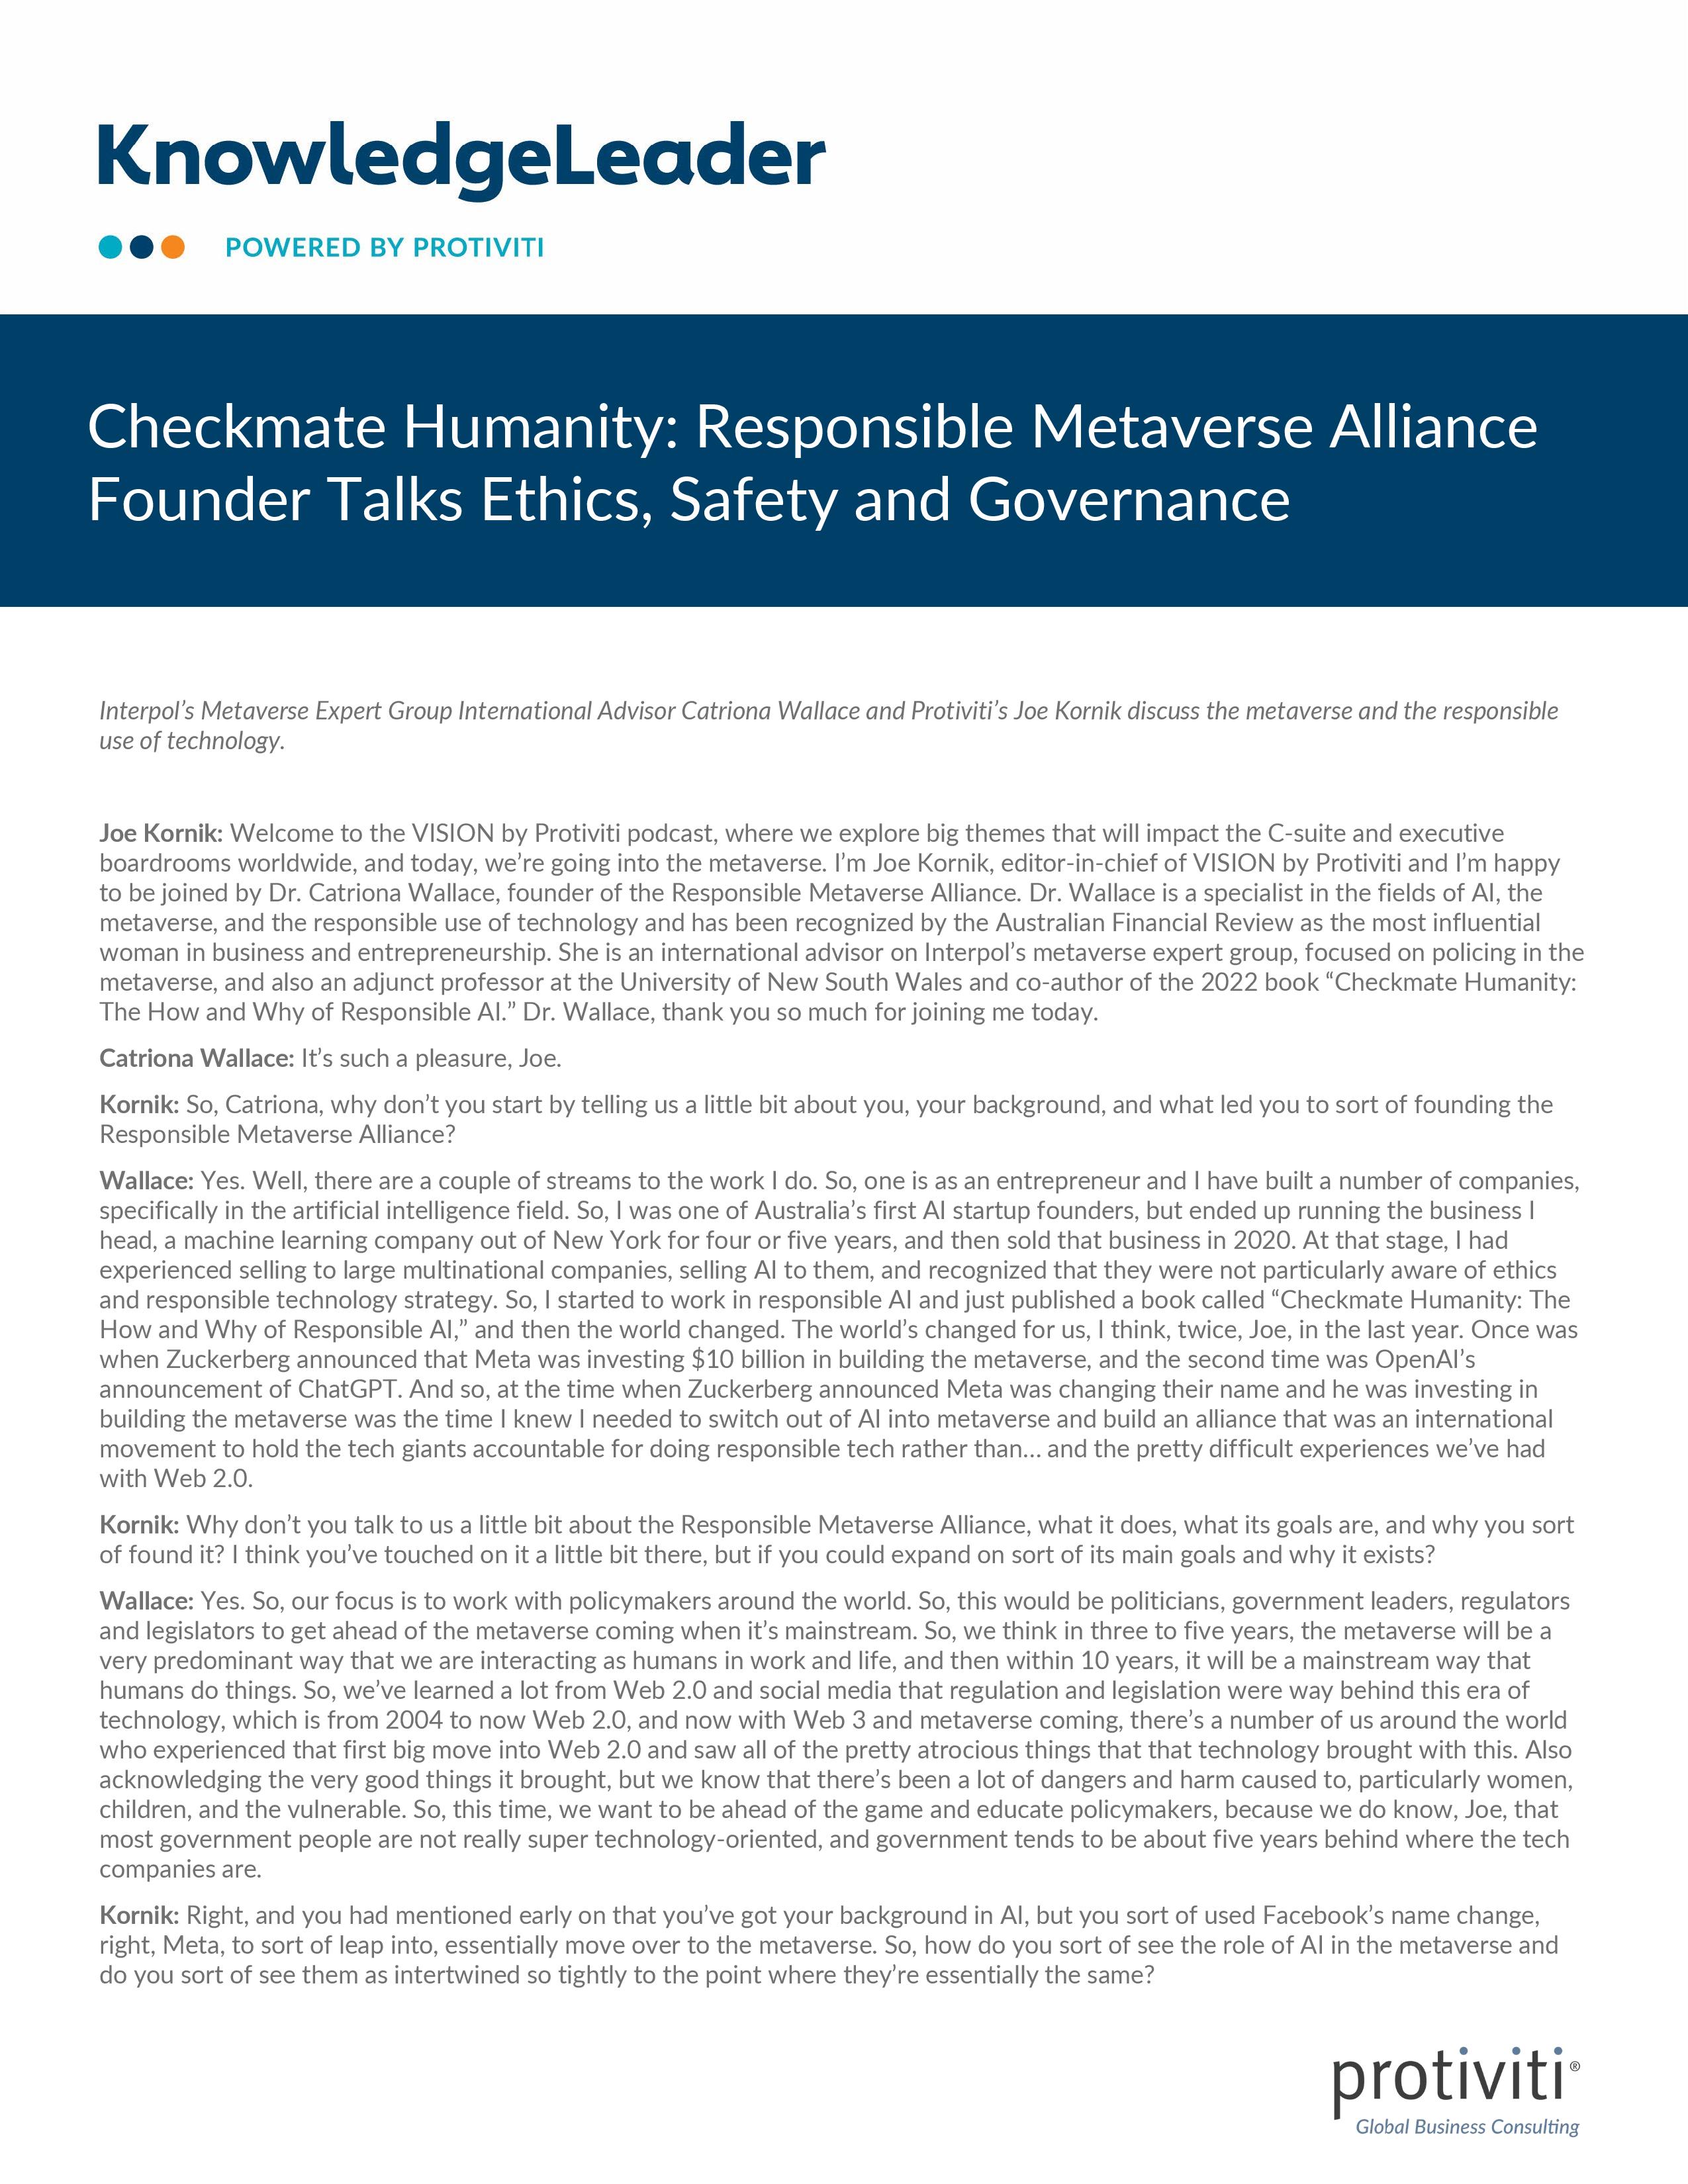 screenshot of the first page of Checkmate Humanity Responsible Metaverse Alliance Founder Talks Ethics, Safety and Governance